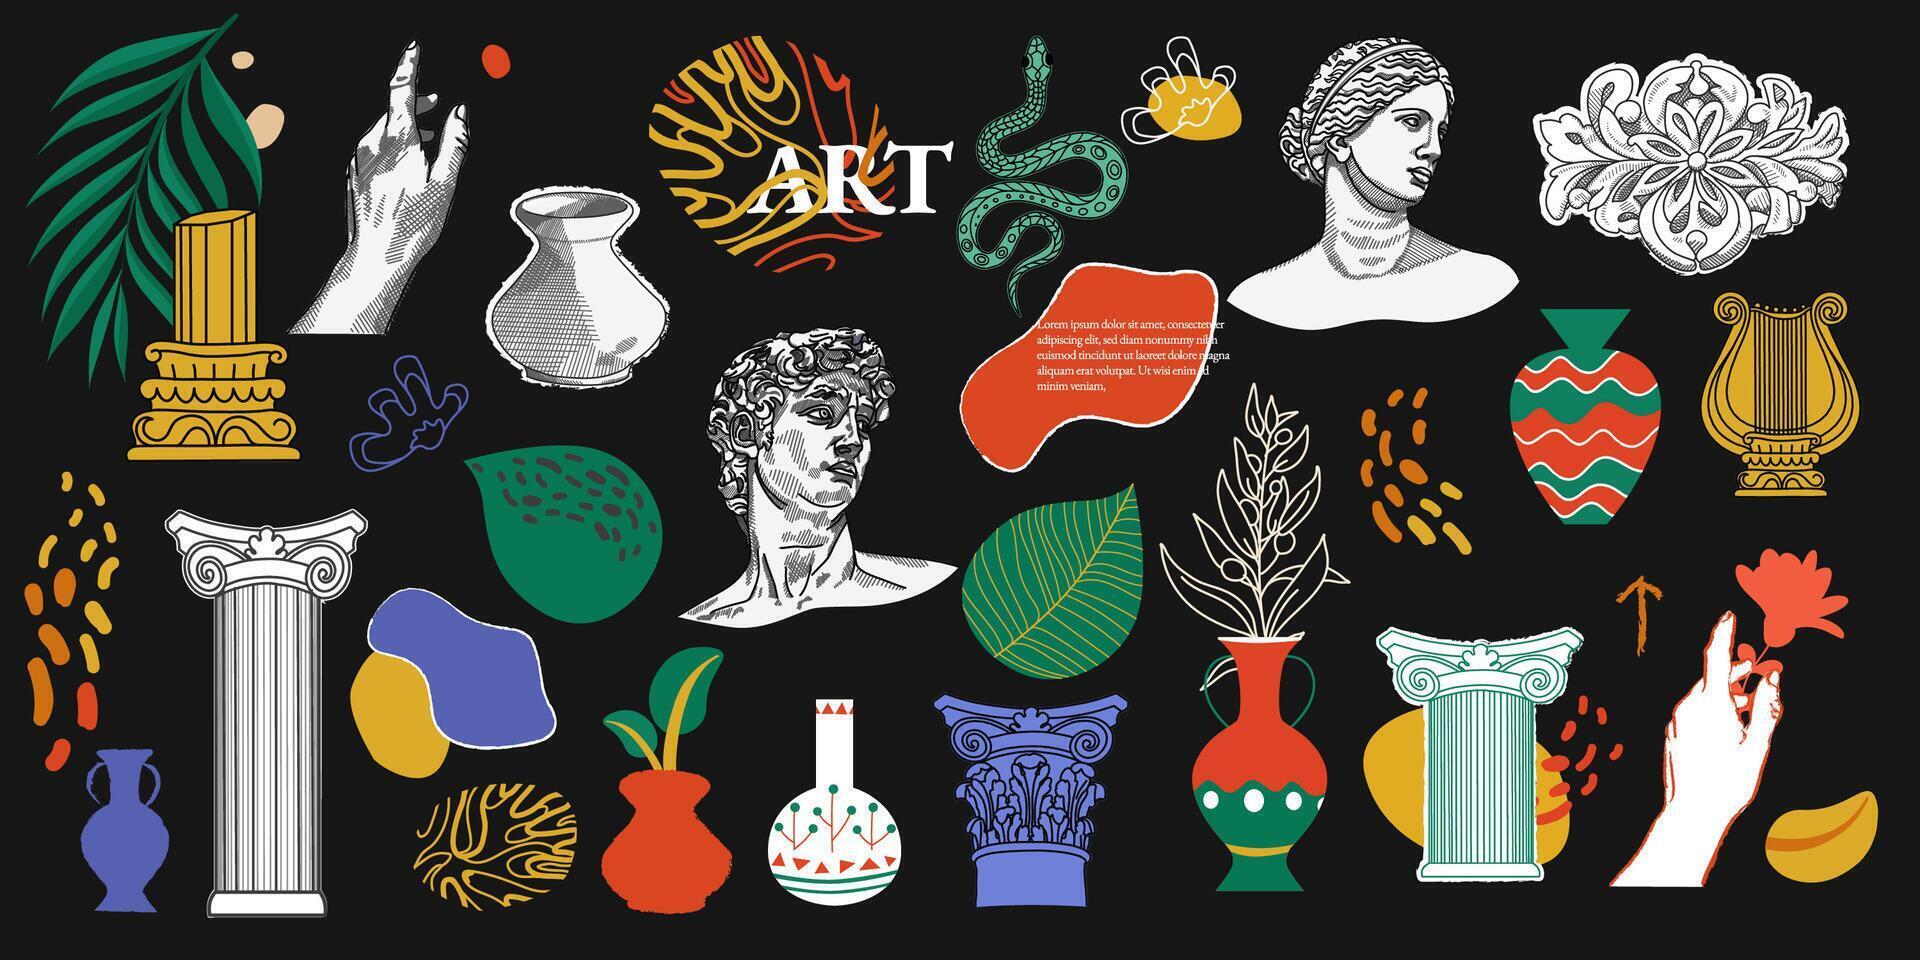 Ancient sculptures and modern art. Pillars, bust, harp, column, vases, amphoras, snake. Classic art elements and Abstract shapes sticker pack. Groovy retro 90s style Collection. Collage creator. vector